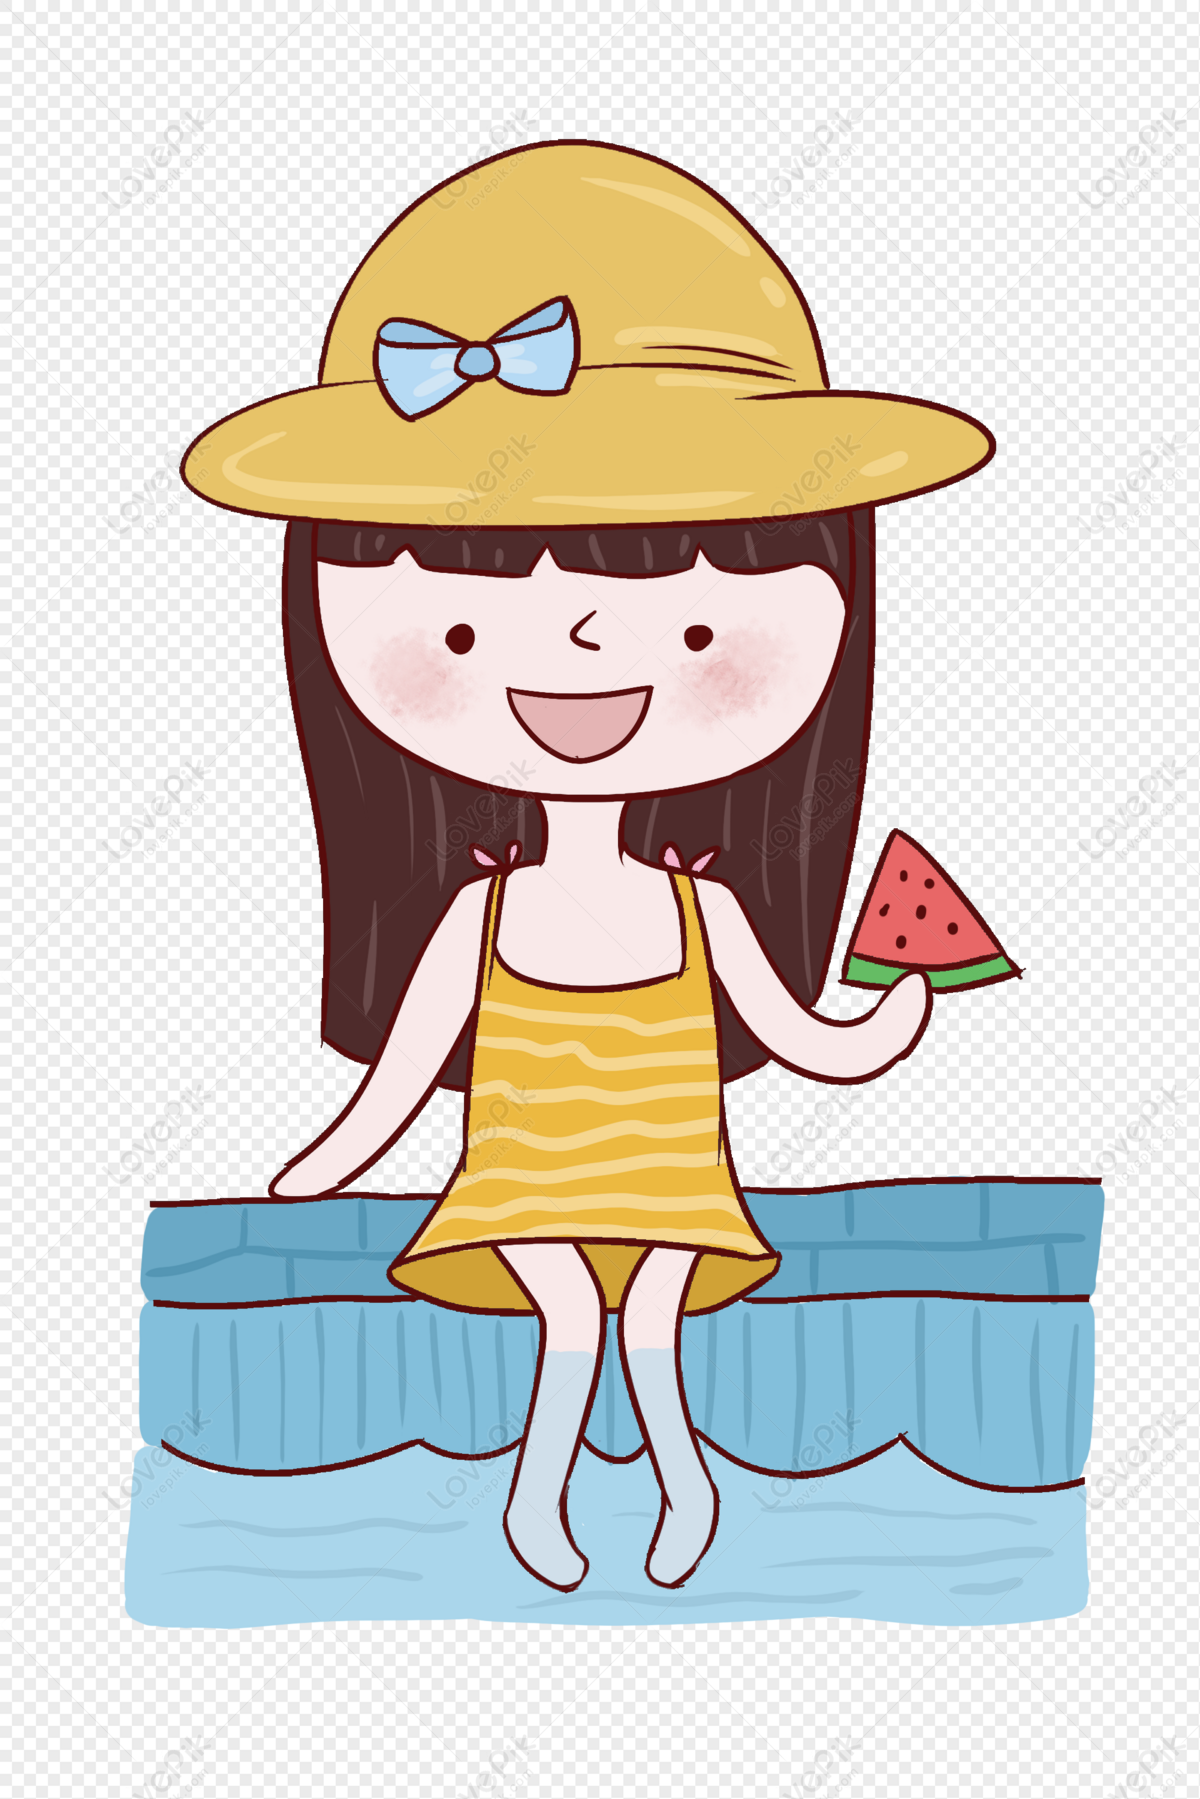 Summer girl sitting on the edge of the pool and eating wa, swimming pool, eating girl, cute png transparent image